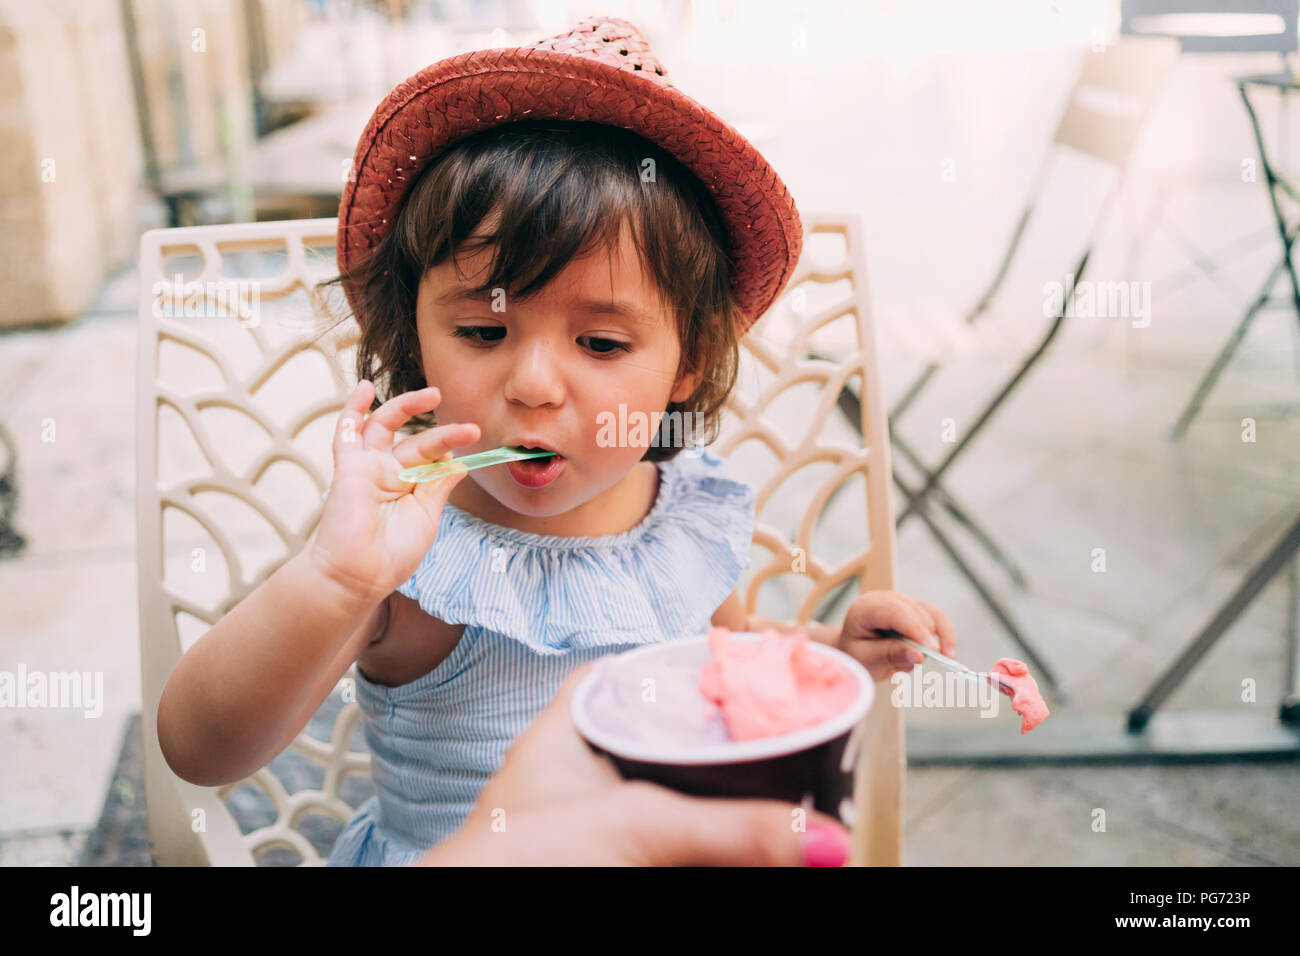 Cute toddler girl eating an ice cream held by her mother Stock Photo